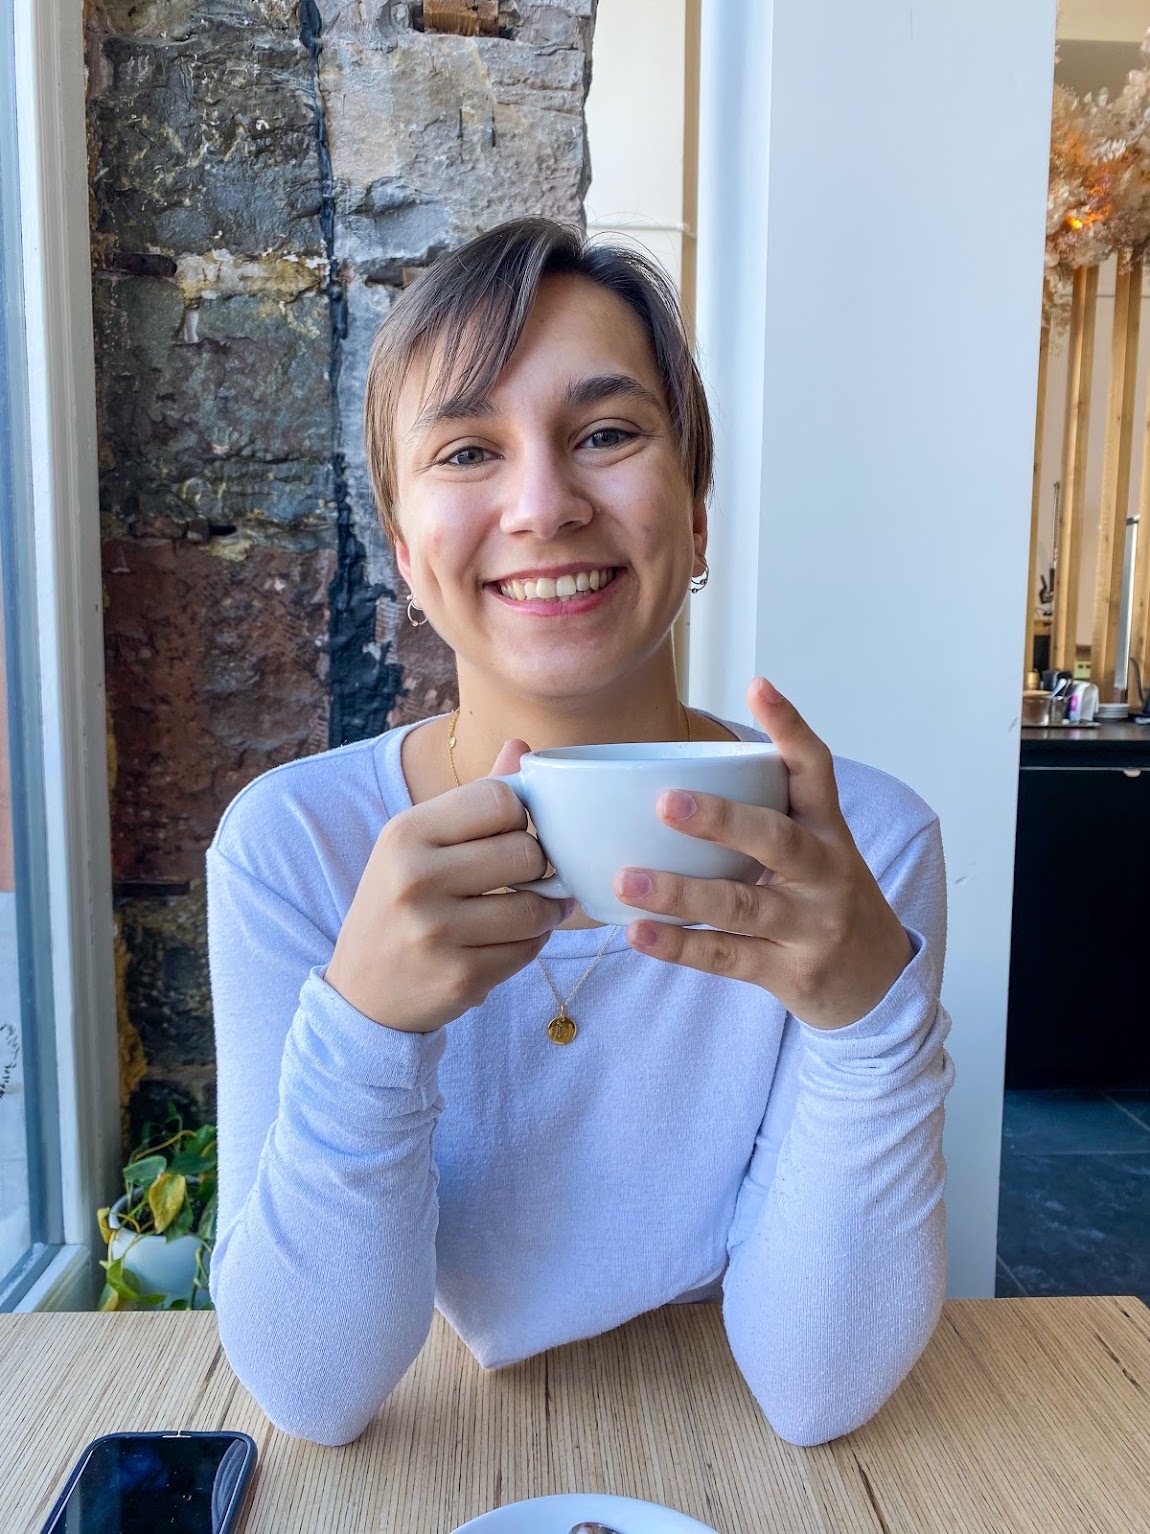 A young woman with light brown hair grins while holding a coffee cup near a window. Teresa has soft bangs that fall across her forehead and a happy, relaxed demeanor.